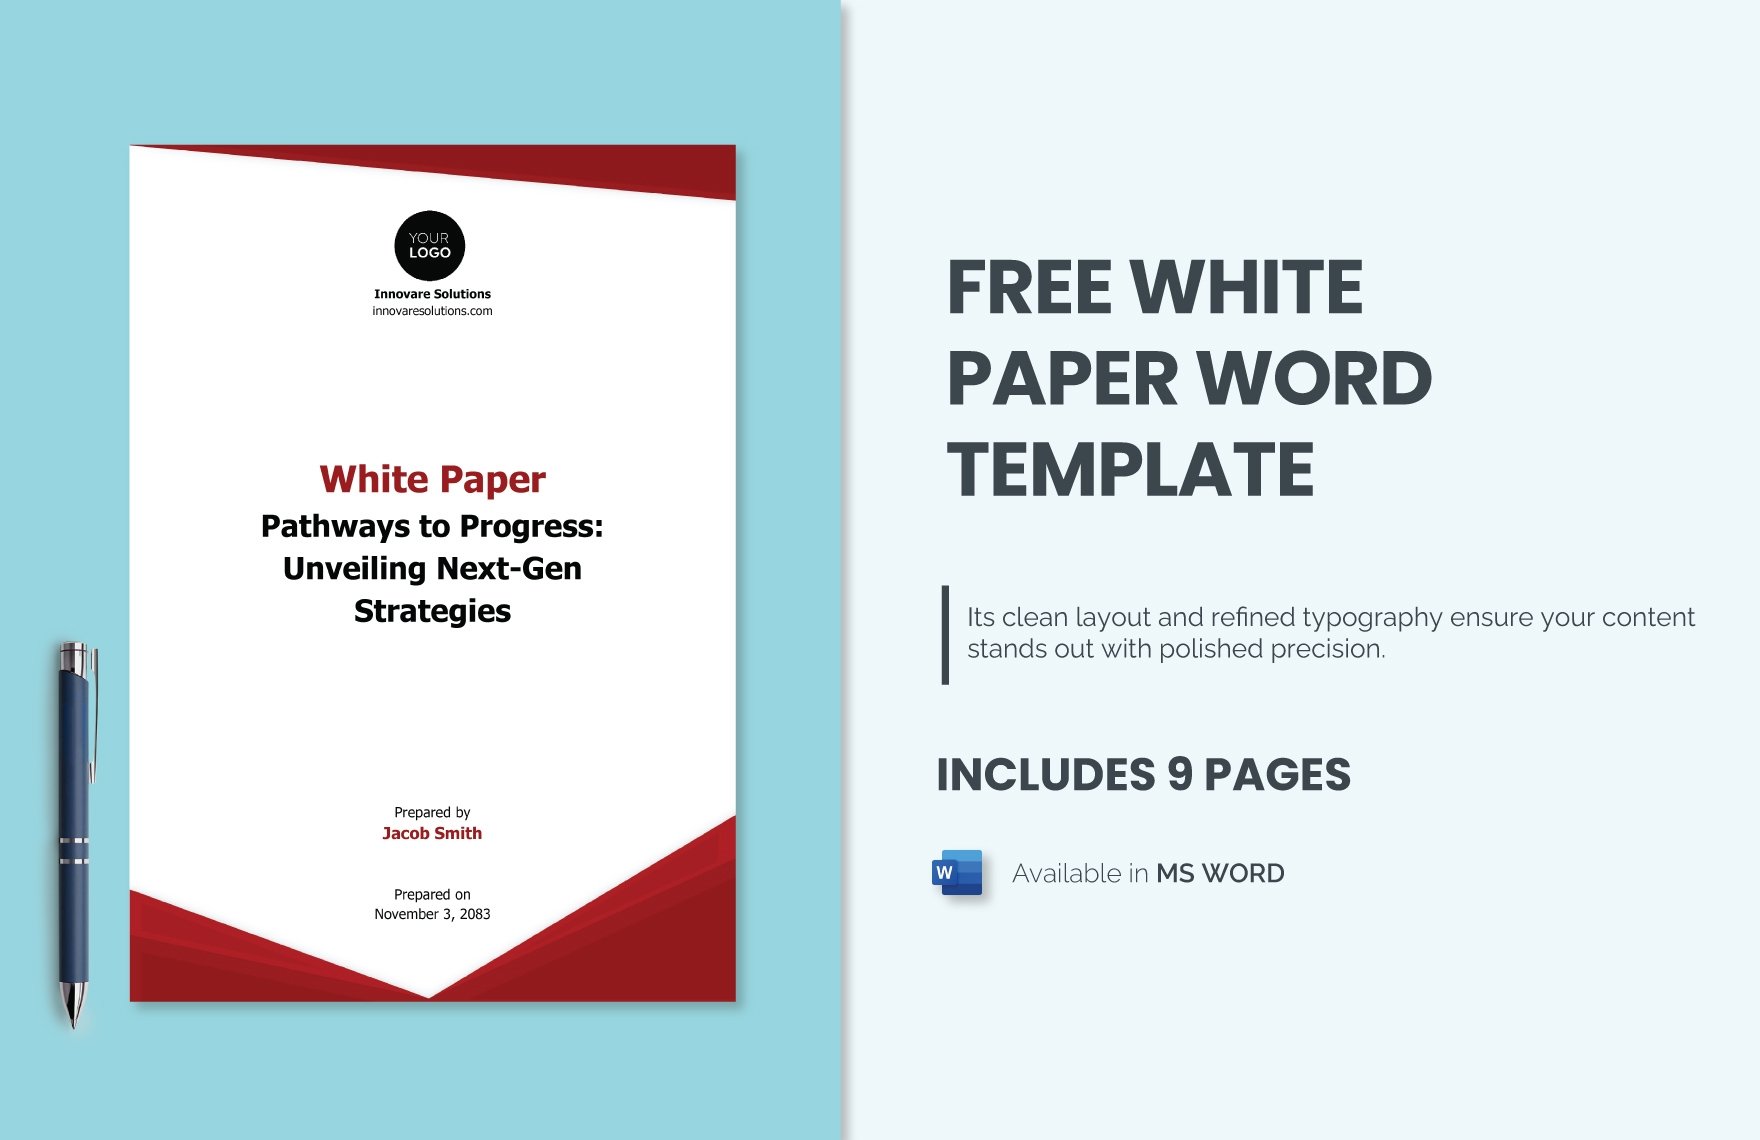 Free White Paper Word Template in Word